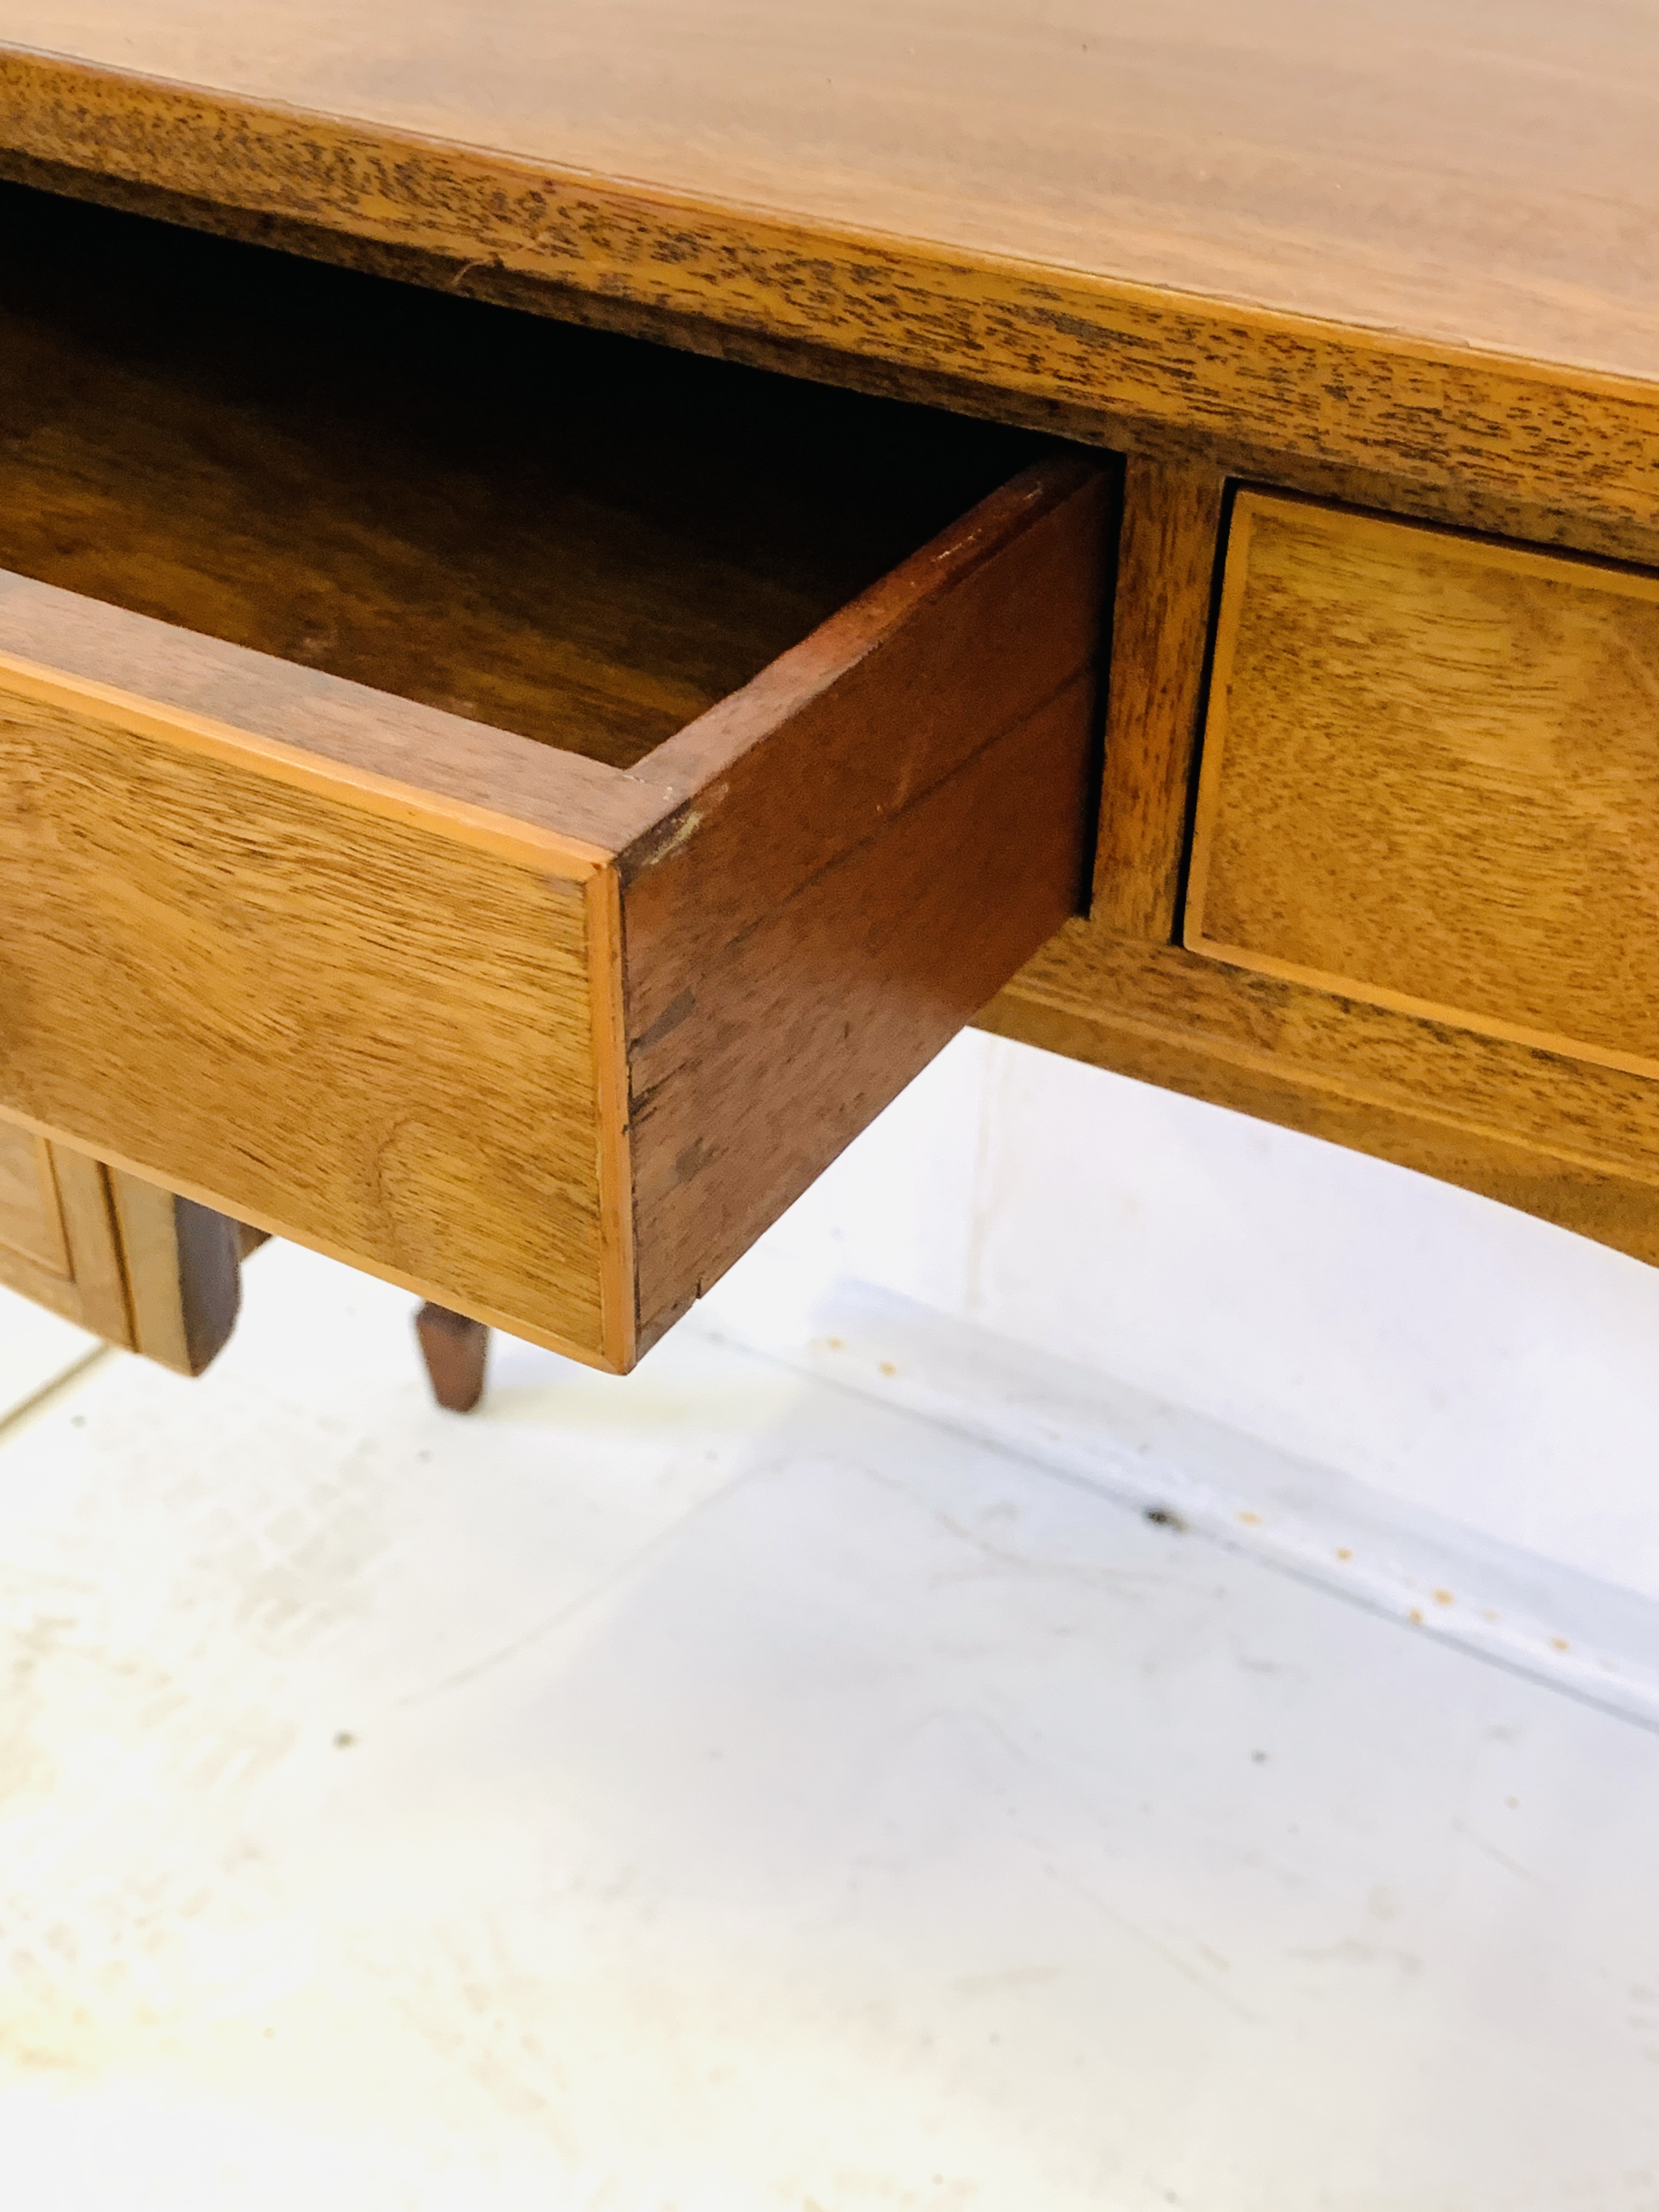 Mahogany bow fronted desk - Image 5 of 6